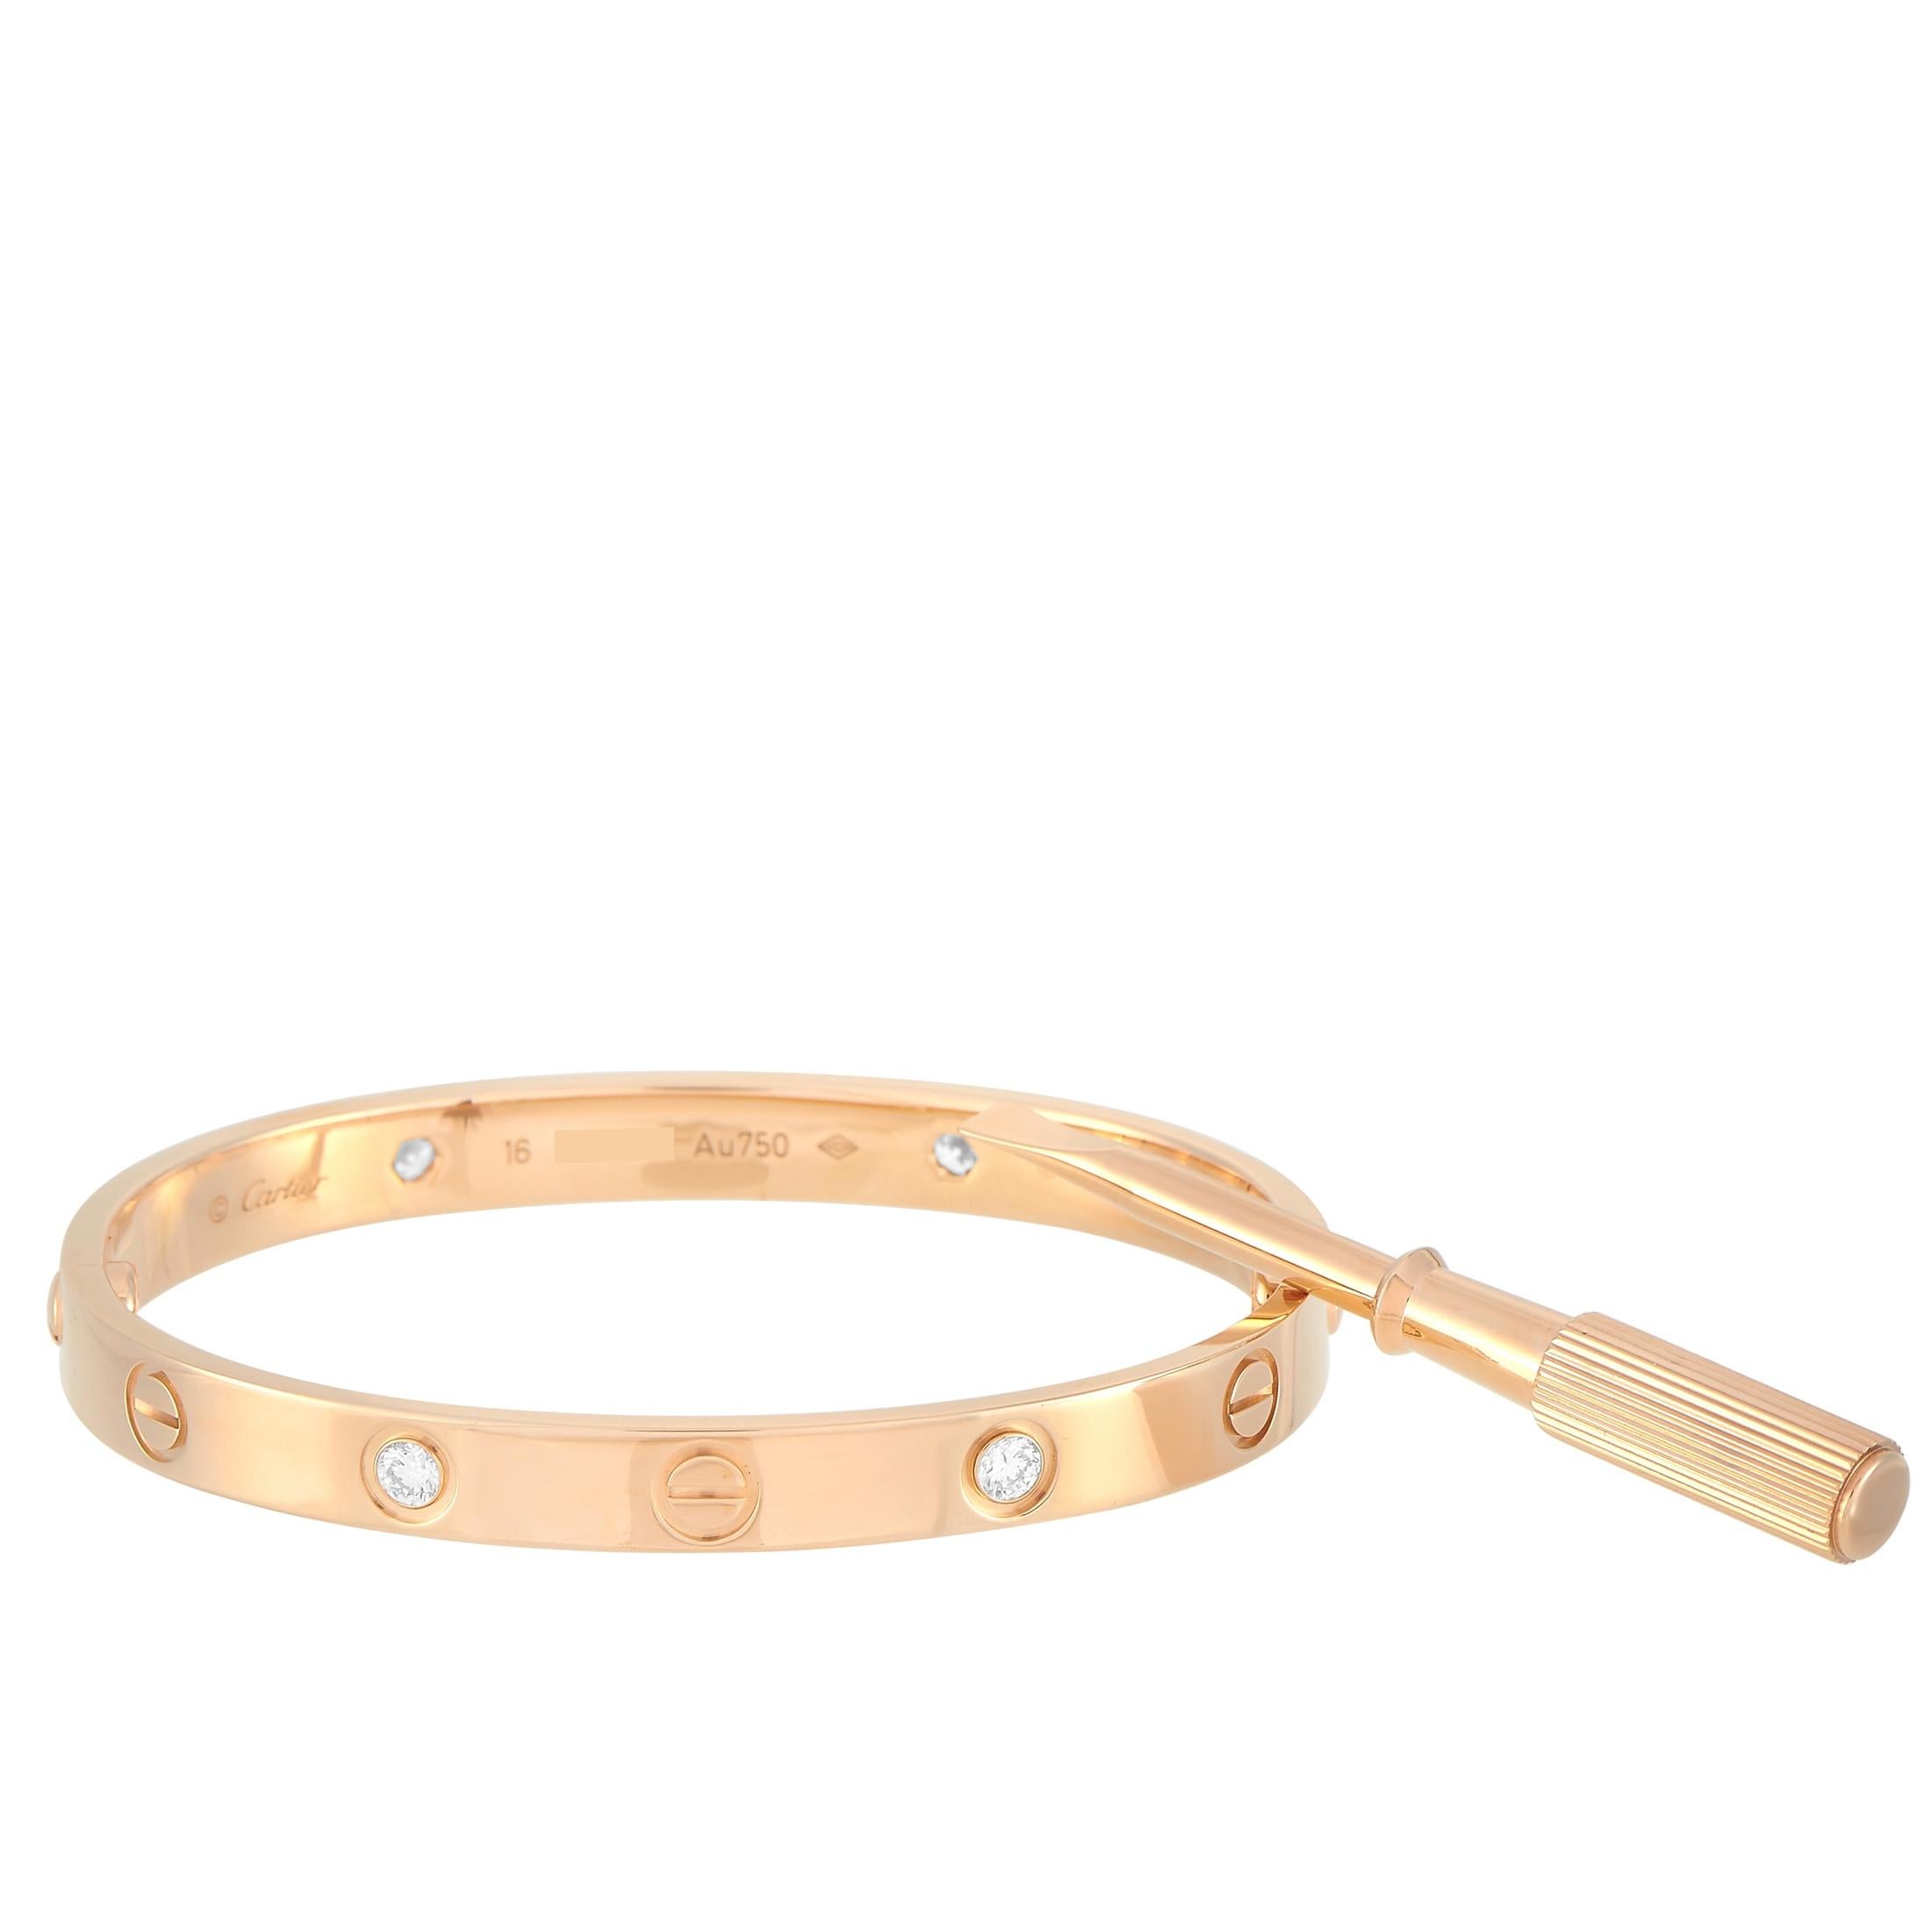 The Cartier “LOVE” bracelet is made of 18K rose gold and set with four diamond stones. The bracelet weighs 31 grams and measures 6.3” in length. It is delivered with a screwdriver.

This jewelry piece is offered in estate condition and includes a